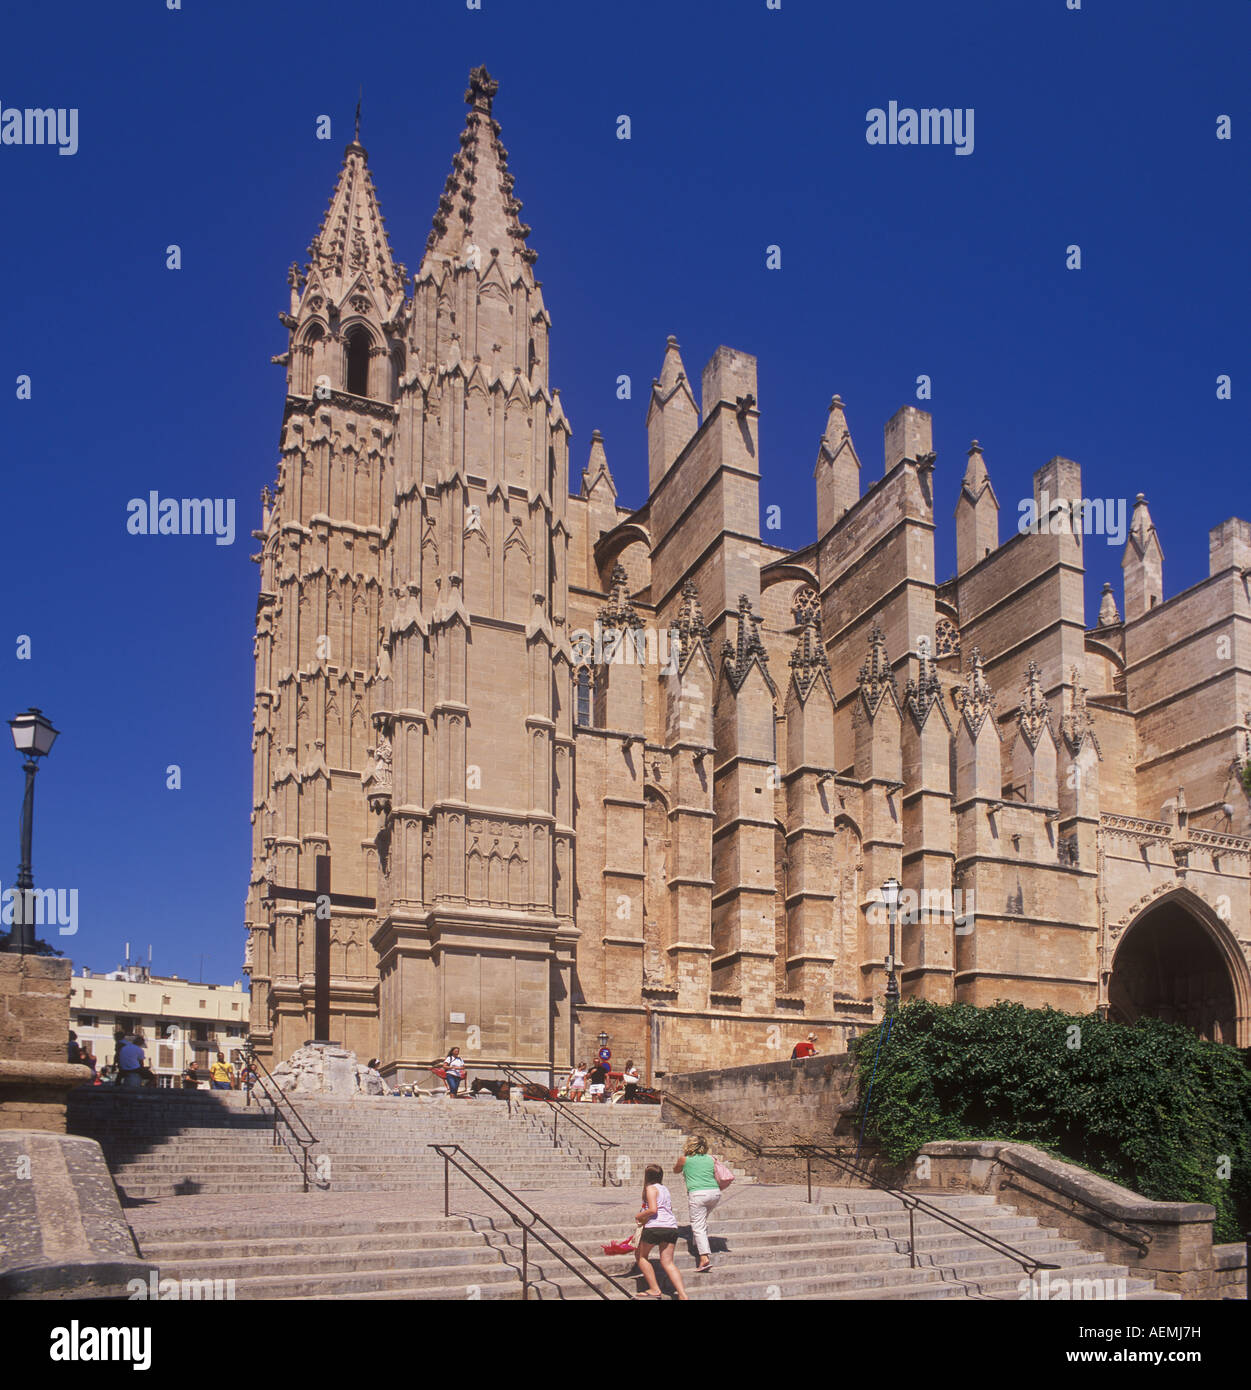 Historic Gothic Cathedral (built during 14th - 19th century), Palma de Mallorca, Balearic Islands, Spain. 31st July 2007. Stock Photo